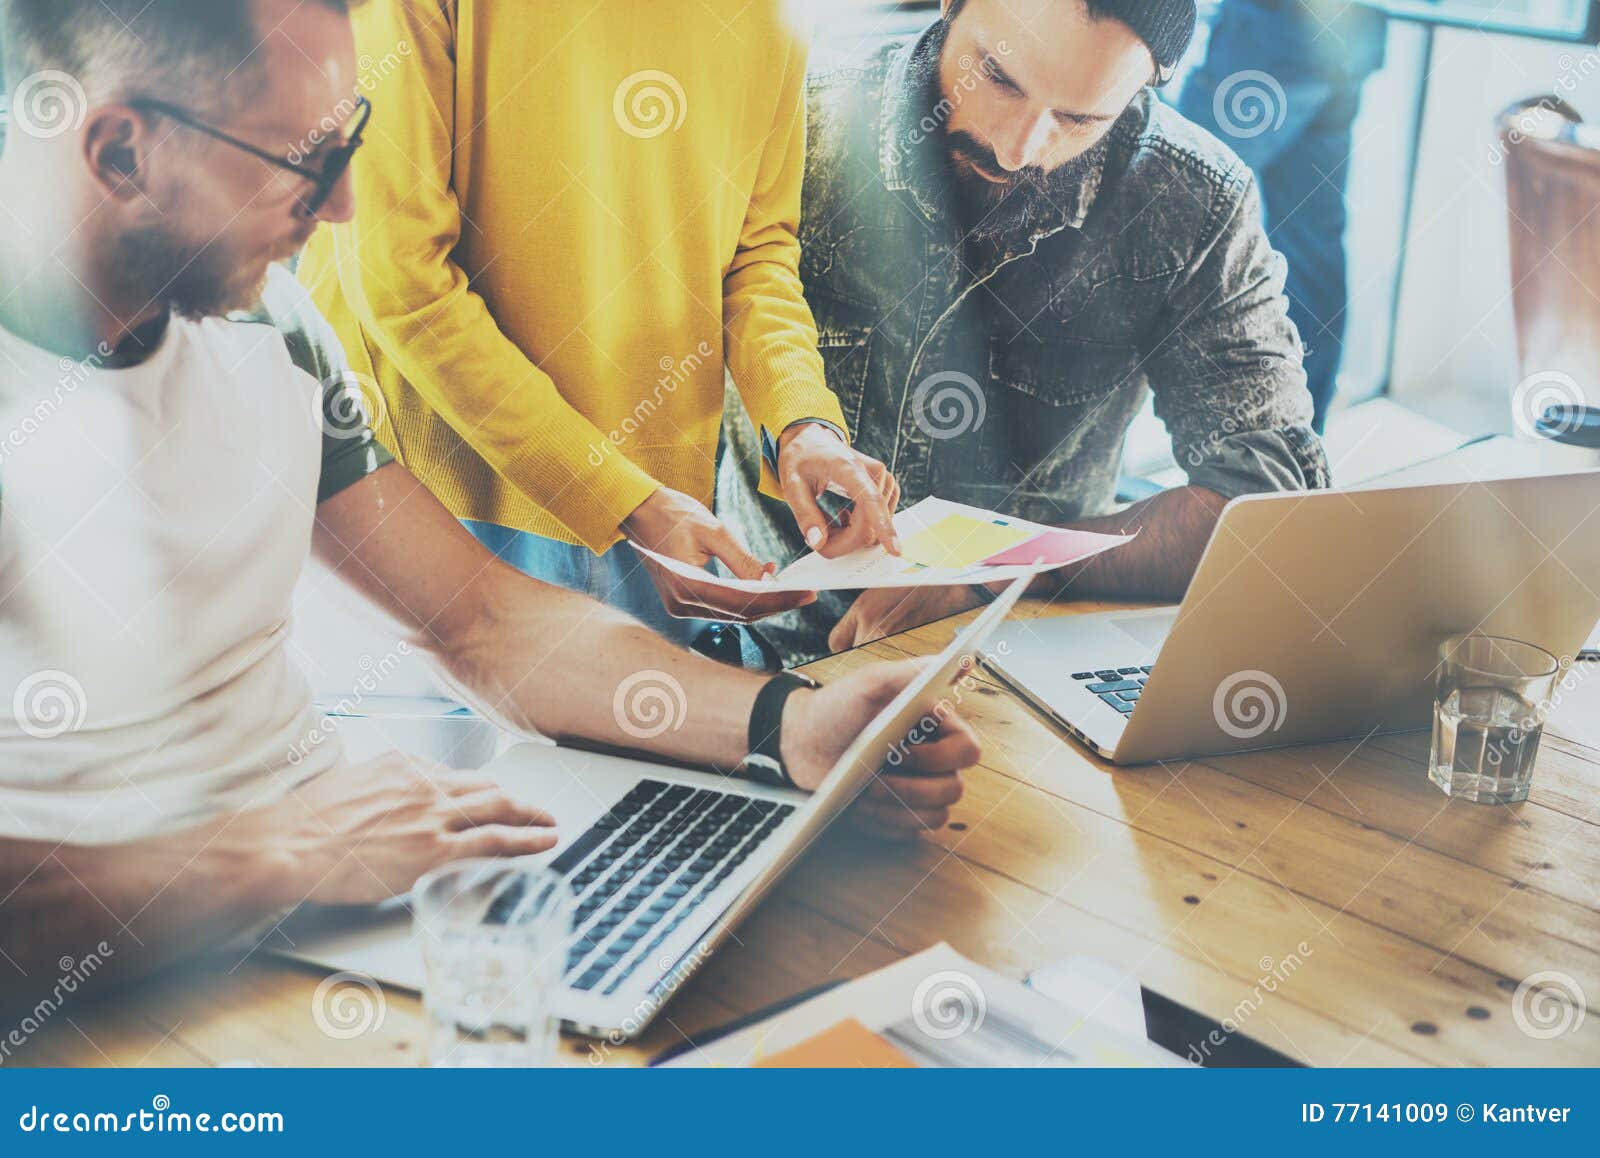 coworkers team work modern office place.account manager showing new business idea startup presentation.woman holding